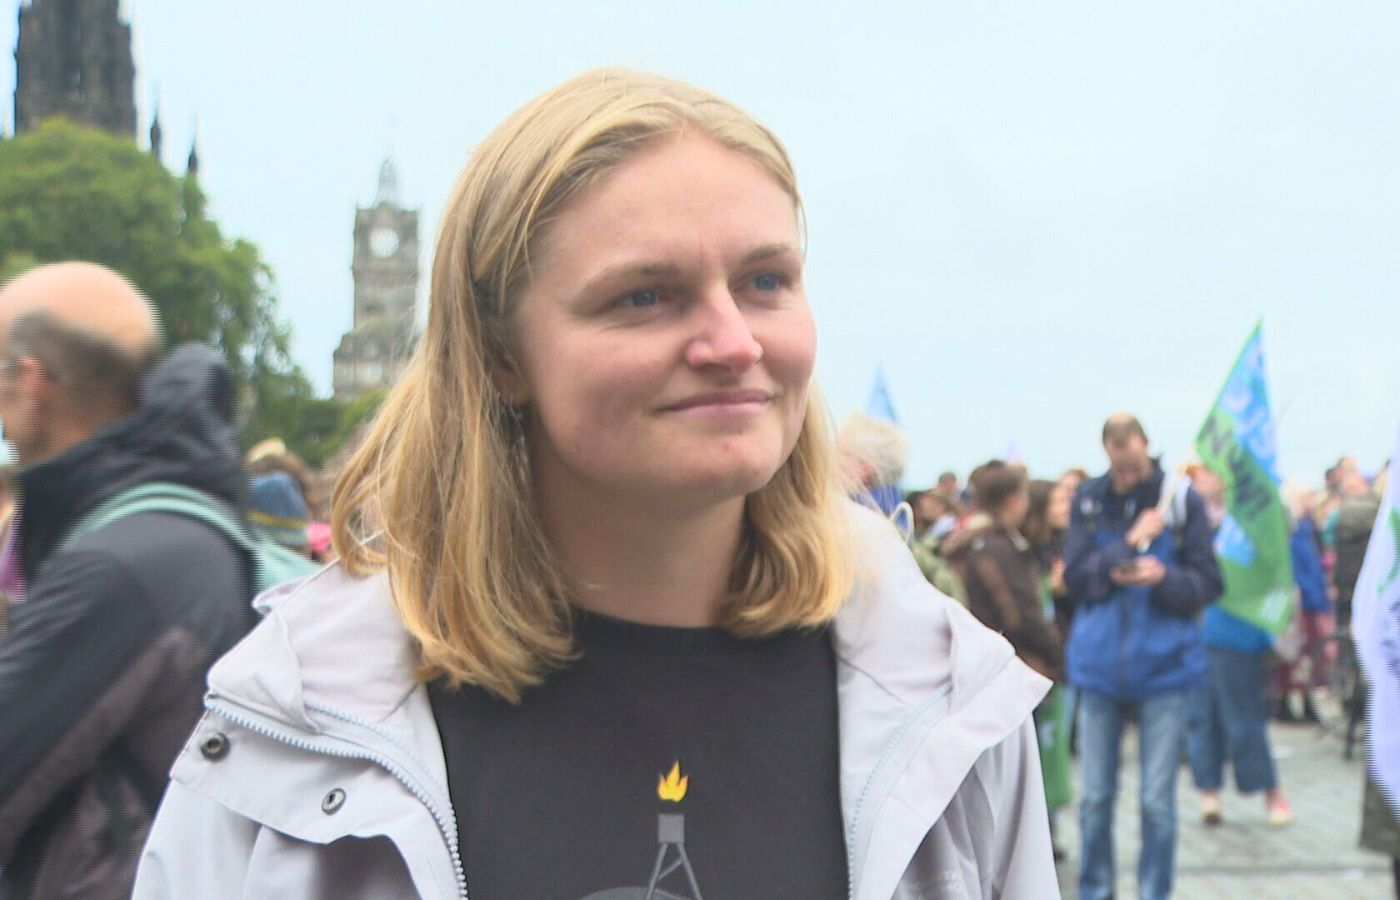 Freya Aitchison, oil and Gas campaigner with Friends of the Earth Scotland, said not enough is being done to switch to renewables.